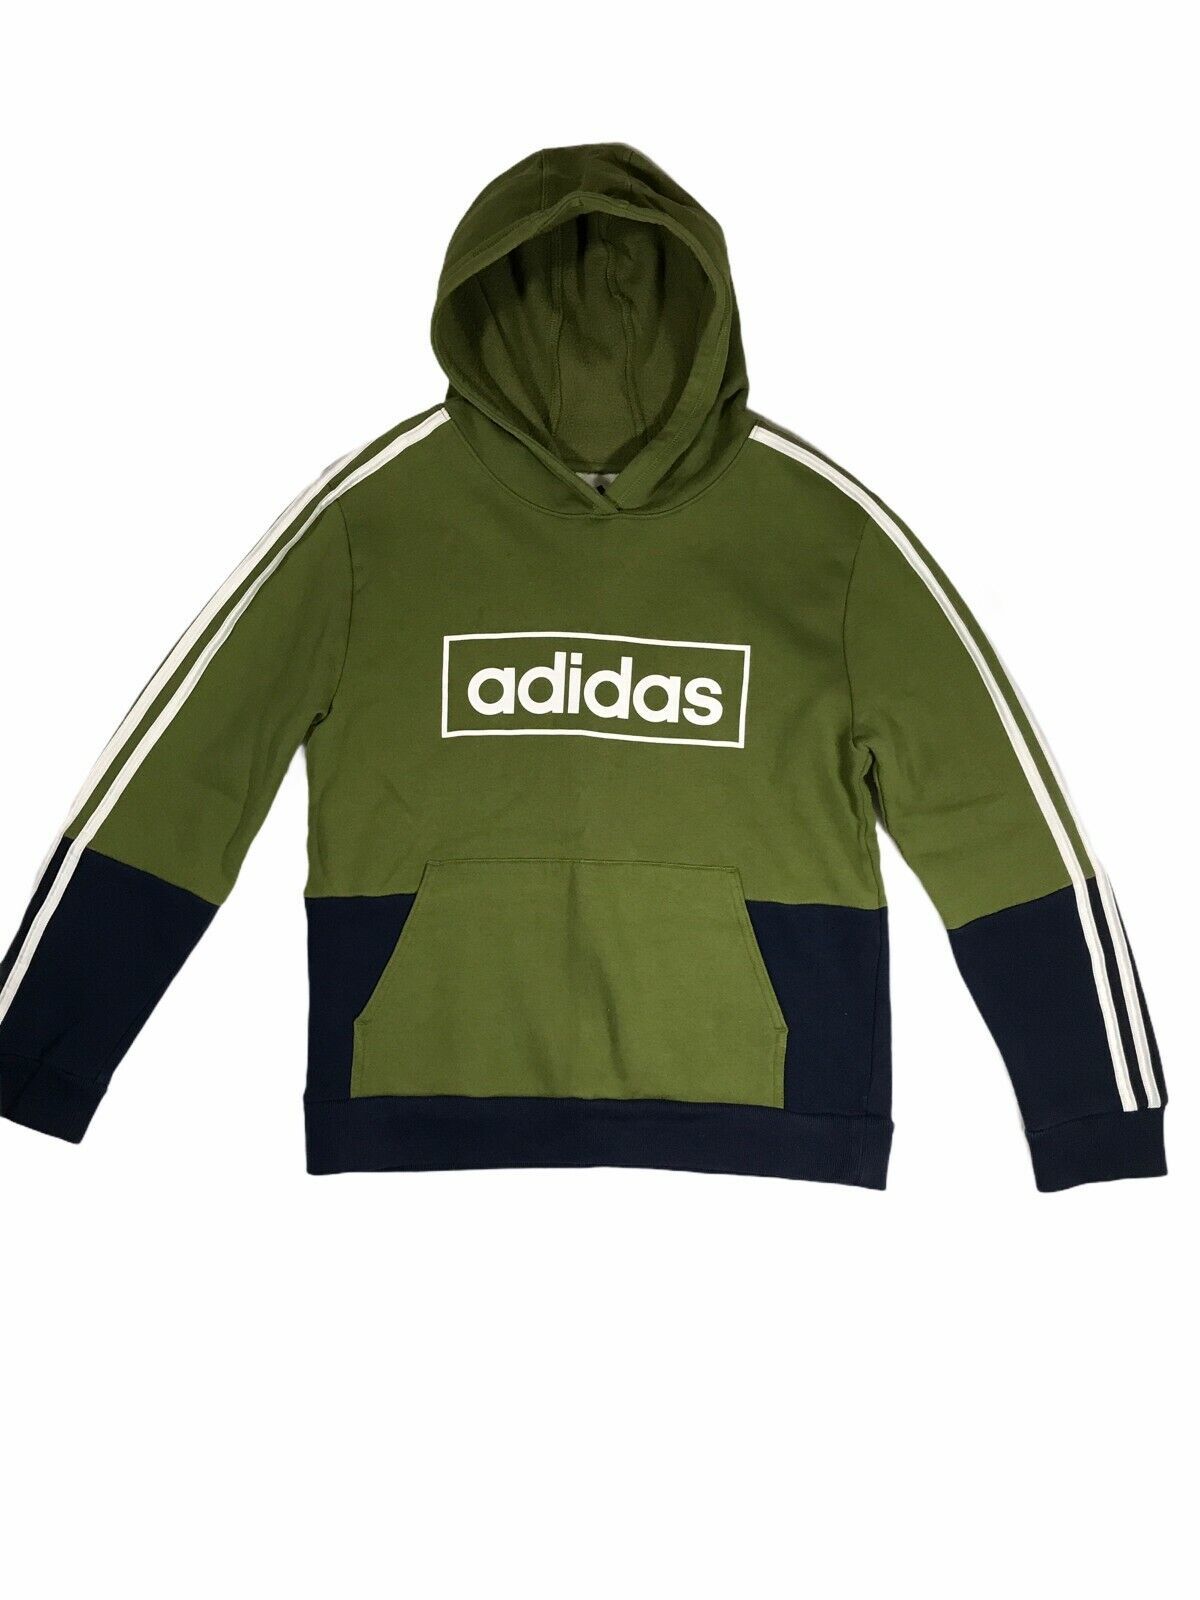 Primary image for Adidas Unisex Kids Hoodie Green/Blue Size L Large 14-16 Outdoors Stretch Comfort